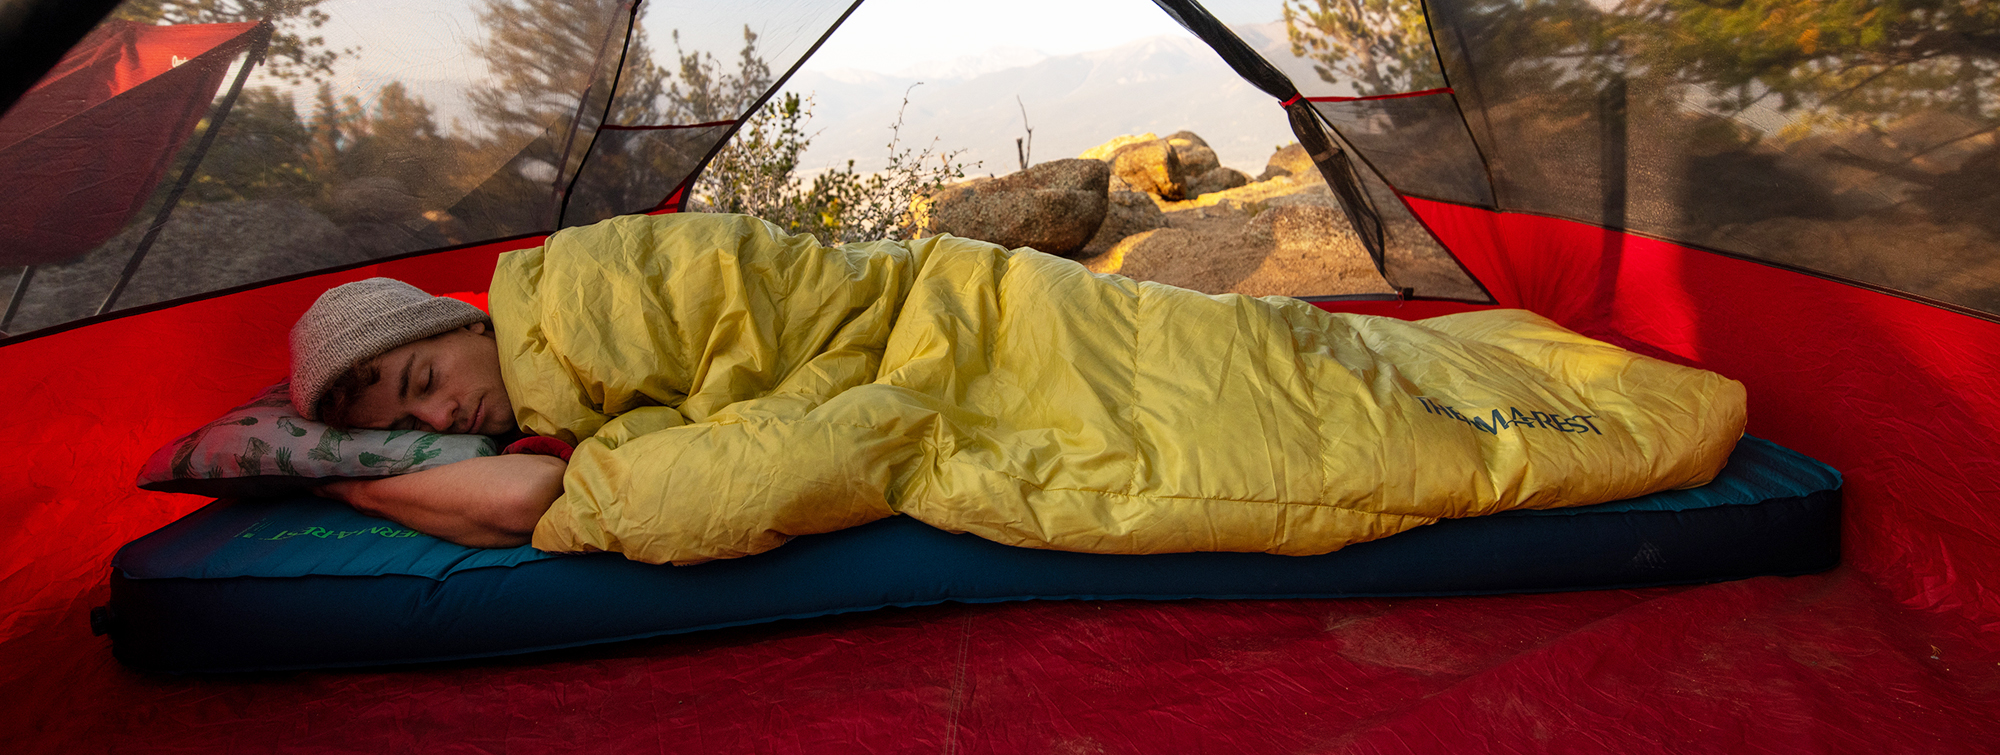 Sleeping Pad Guide, Outdoor Gear Guide